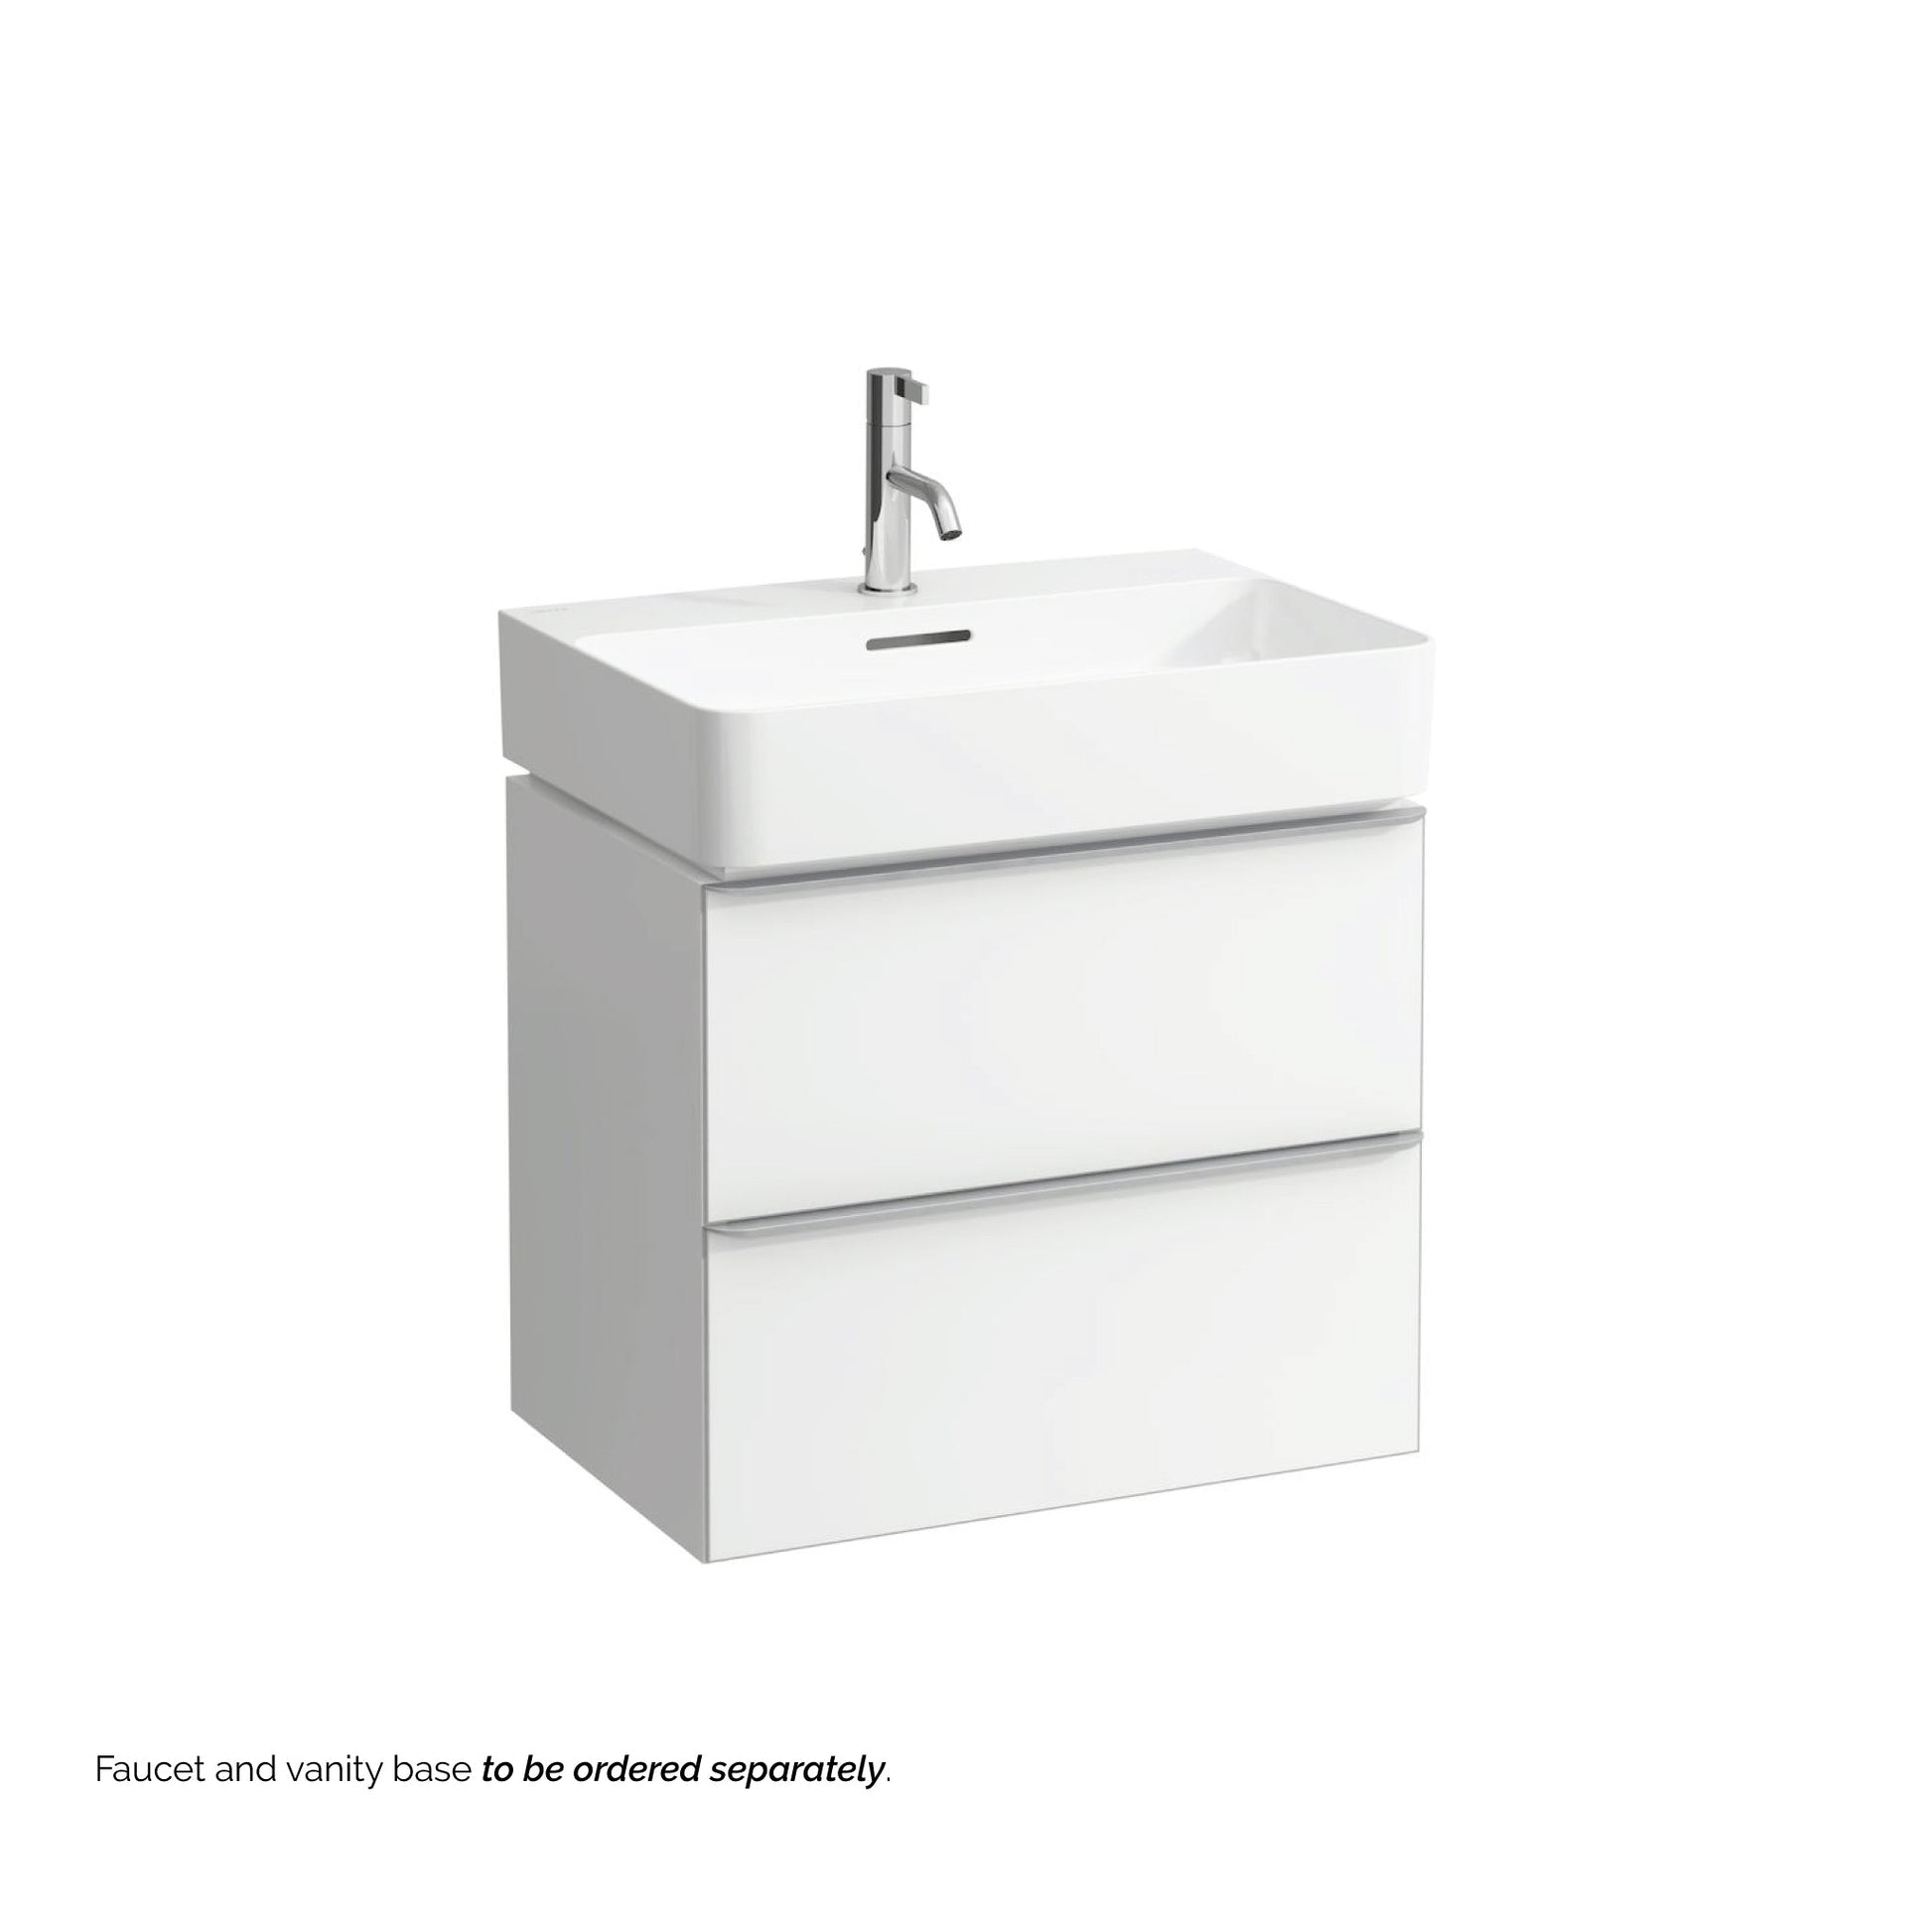 Laufen Val 24" x 17" White Ceramic Wall-Mounted Bathroom Sink With Faucet Hole